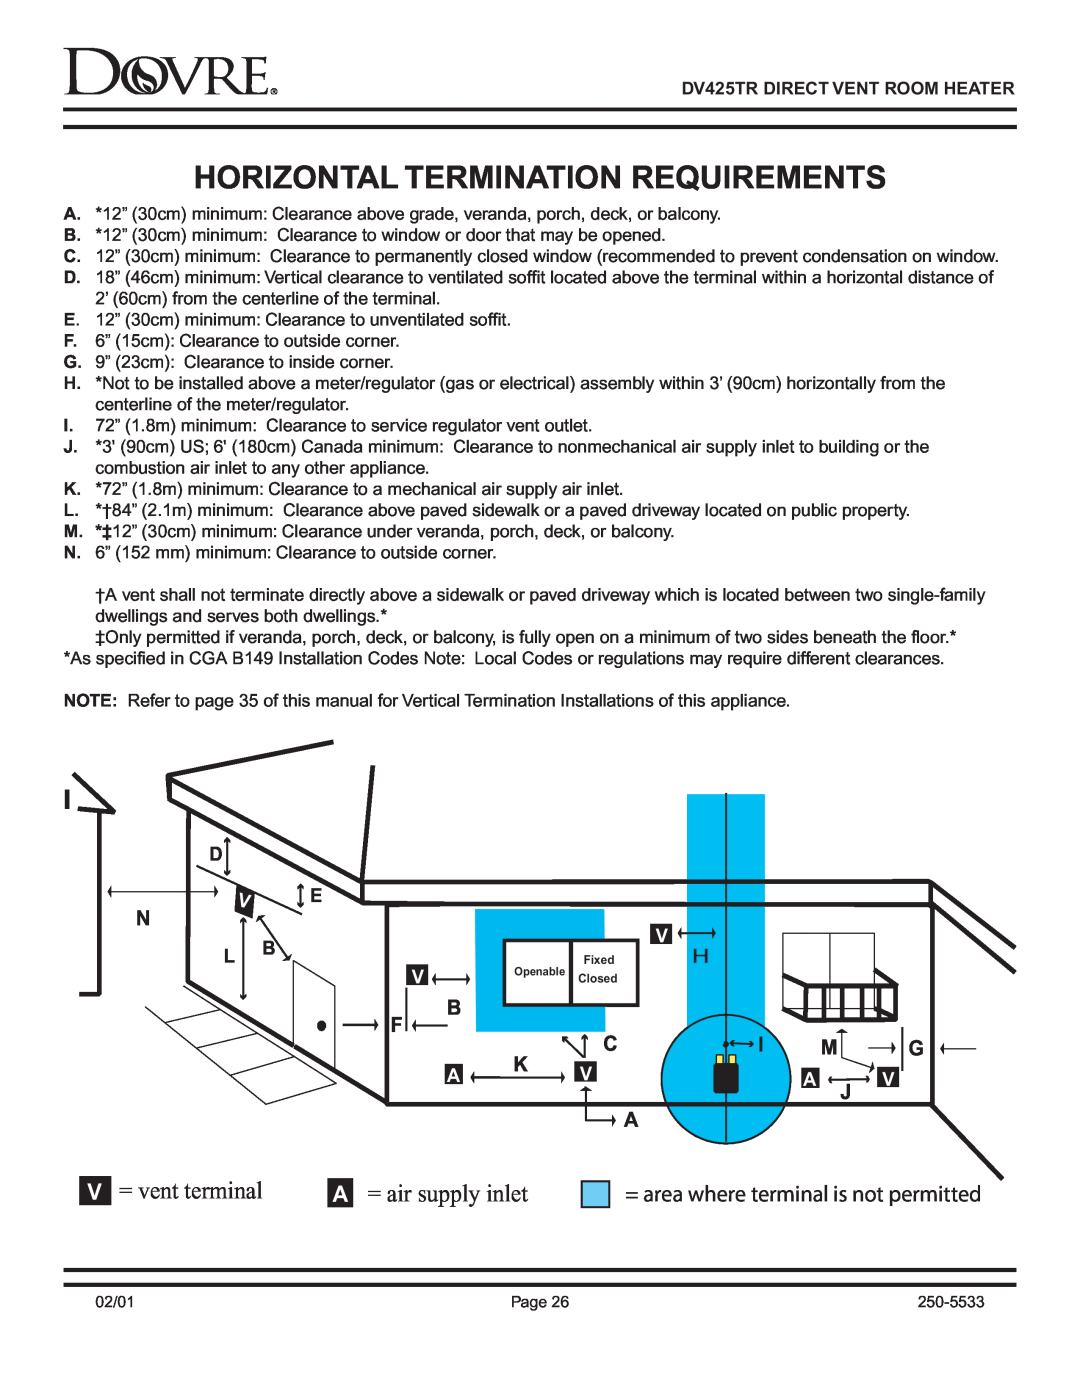 Sapphire Audio DV425TR owner manual Horizontal Termination Requirements, V = vent terminal, A = air supply inlet 